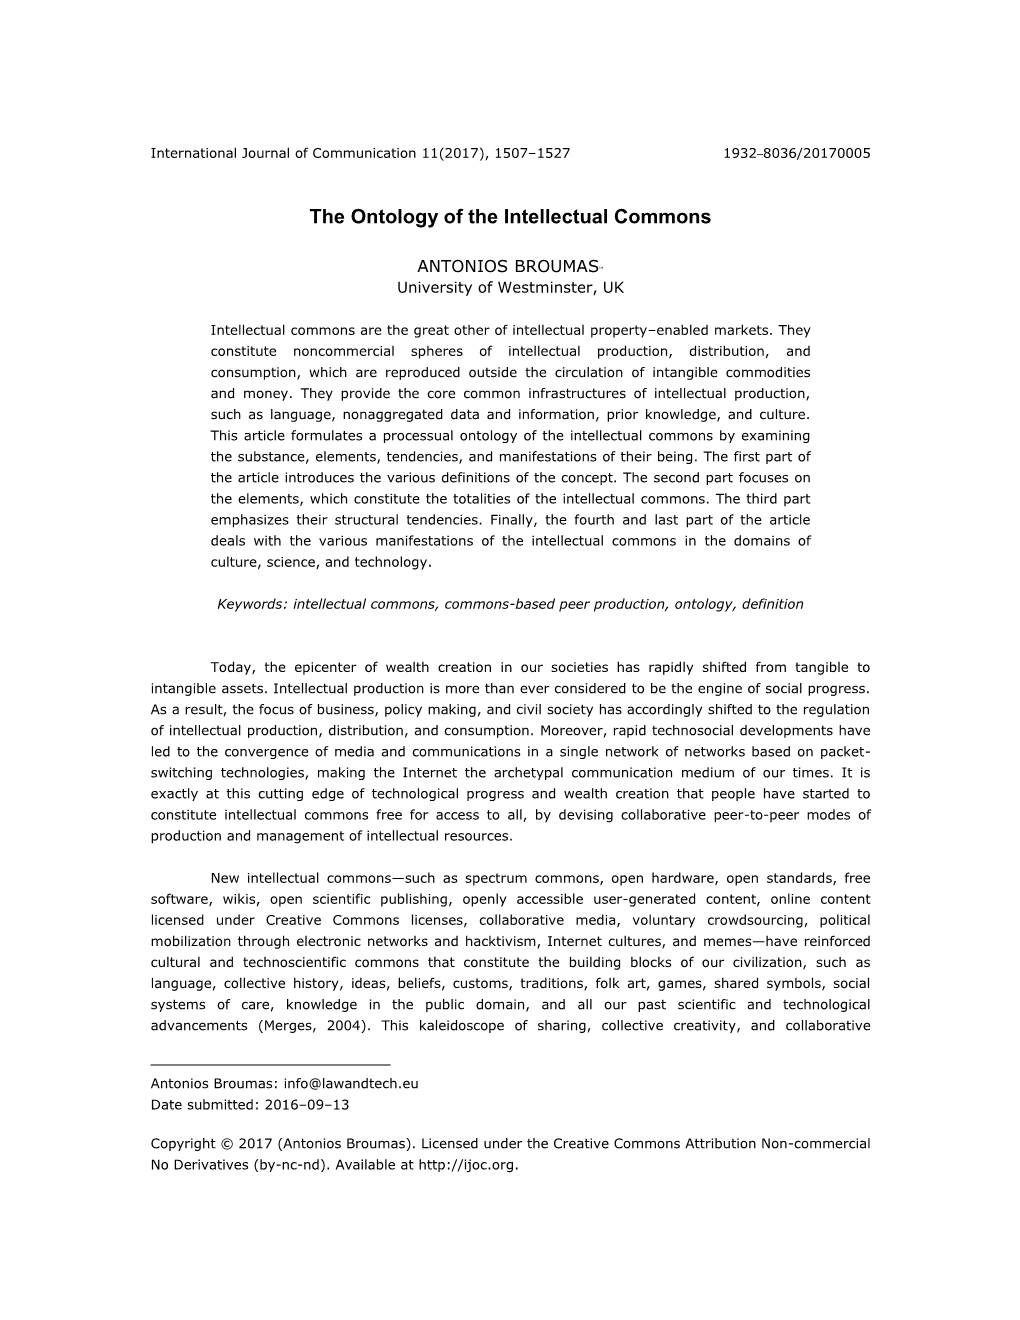 The Ontology of the Intellectual Commons